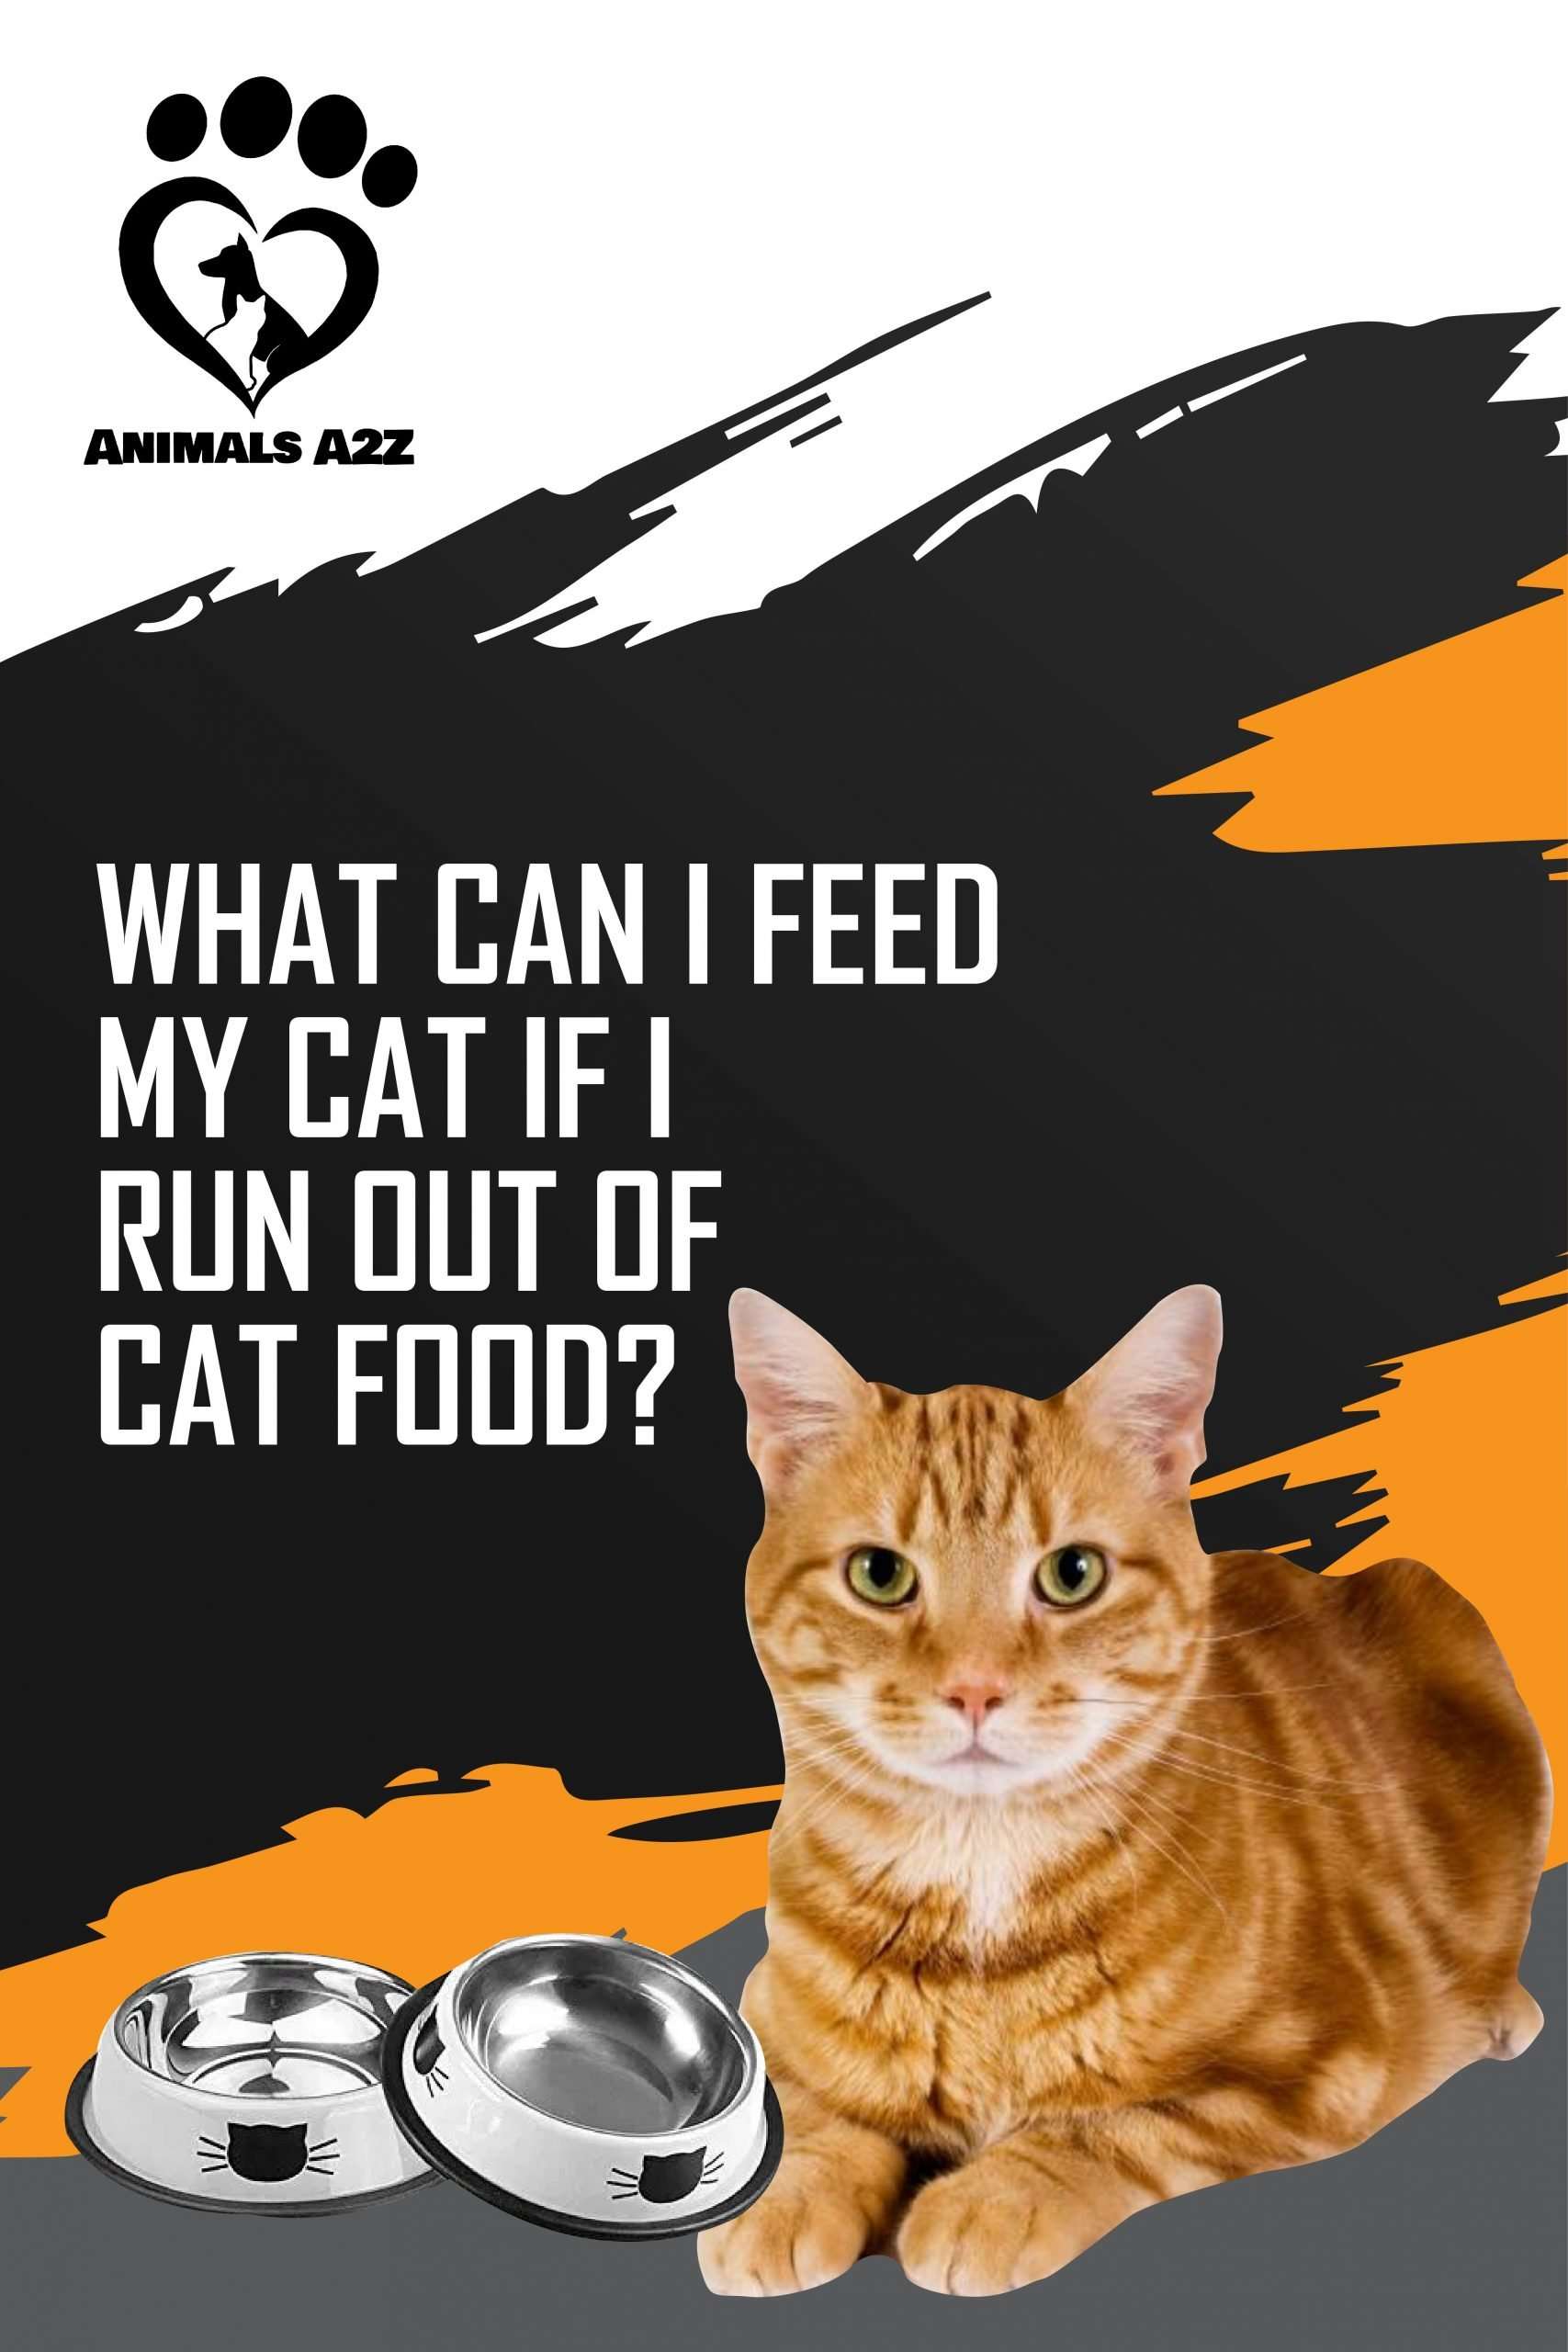 What can I feed my cat if I run out of food?